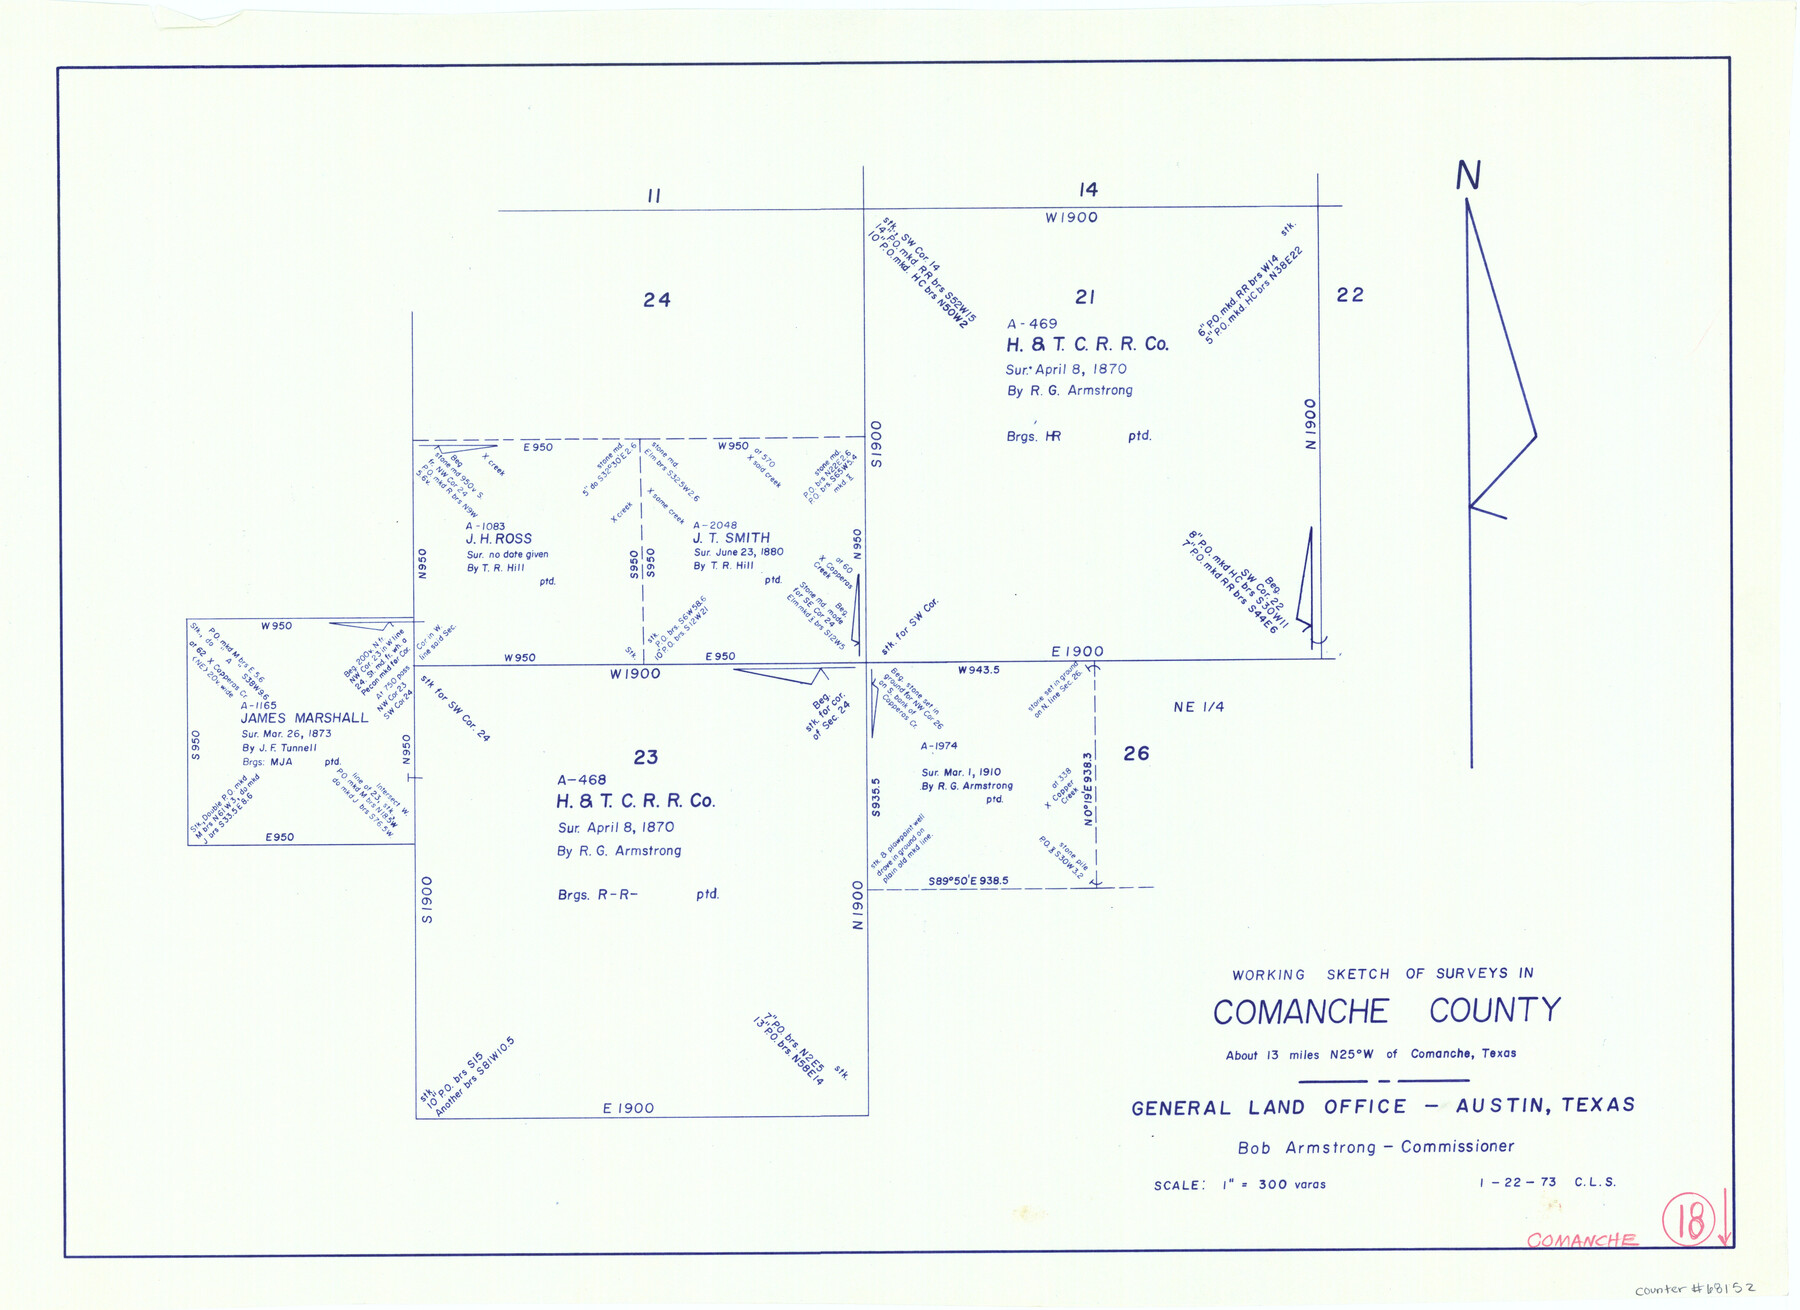 68152, Comanche County Working Sketch 18, General Map Collection